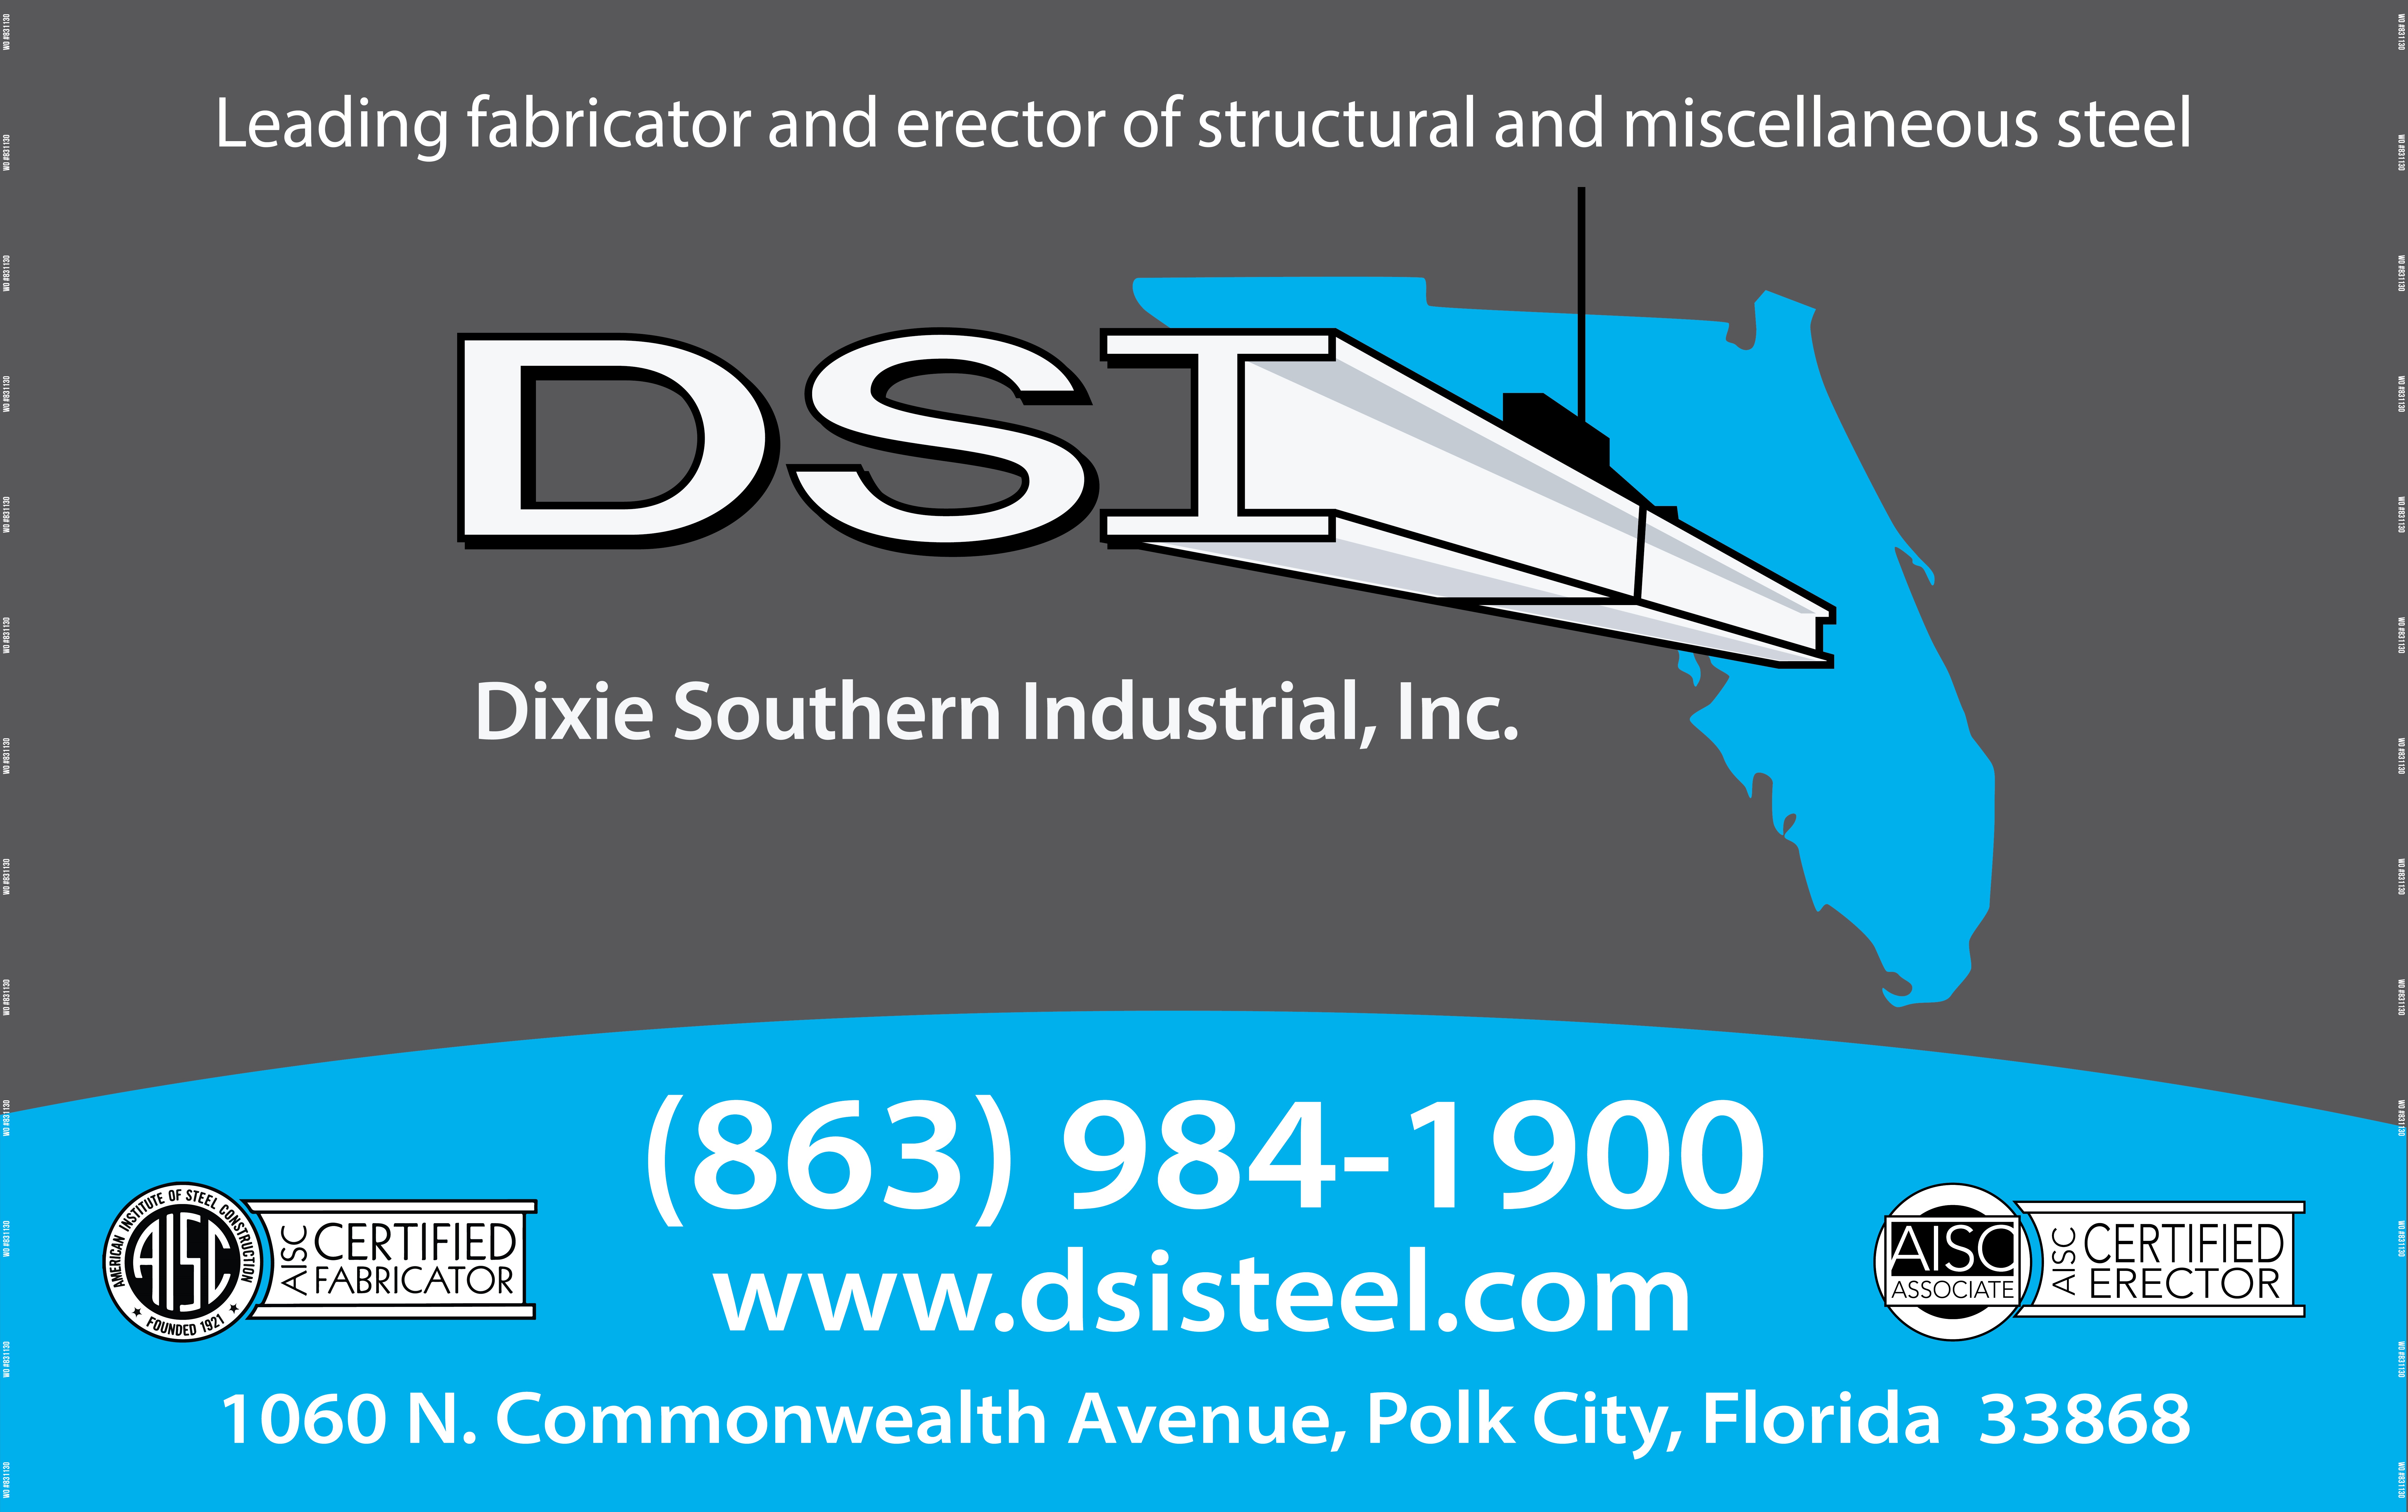 Dixie Southern Industrial, Inc.